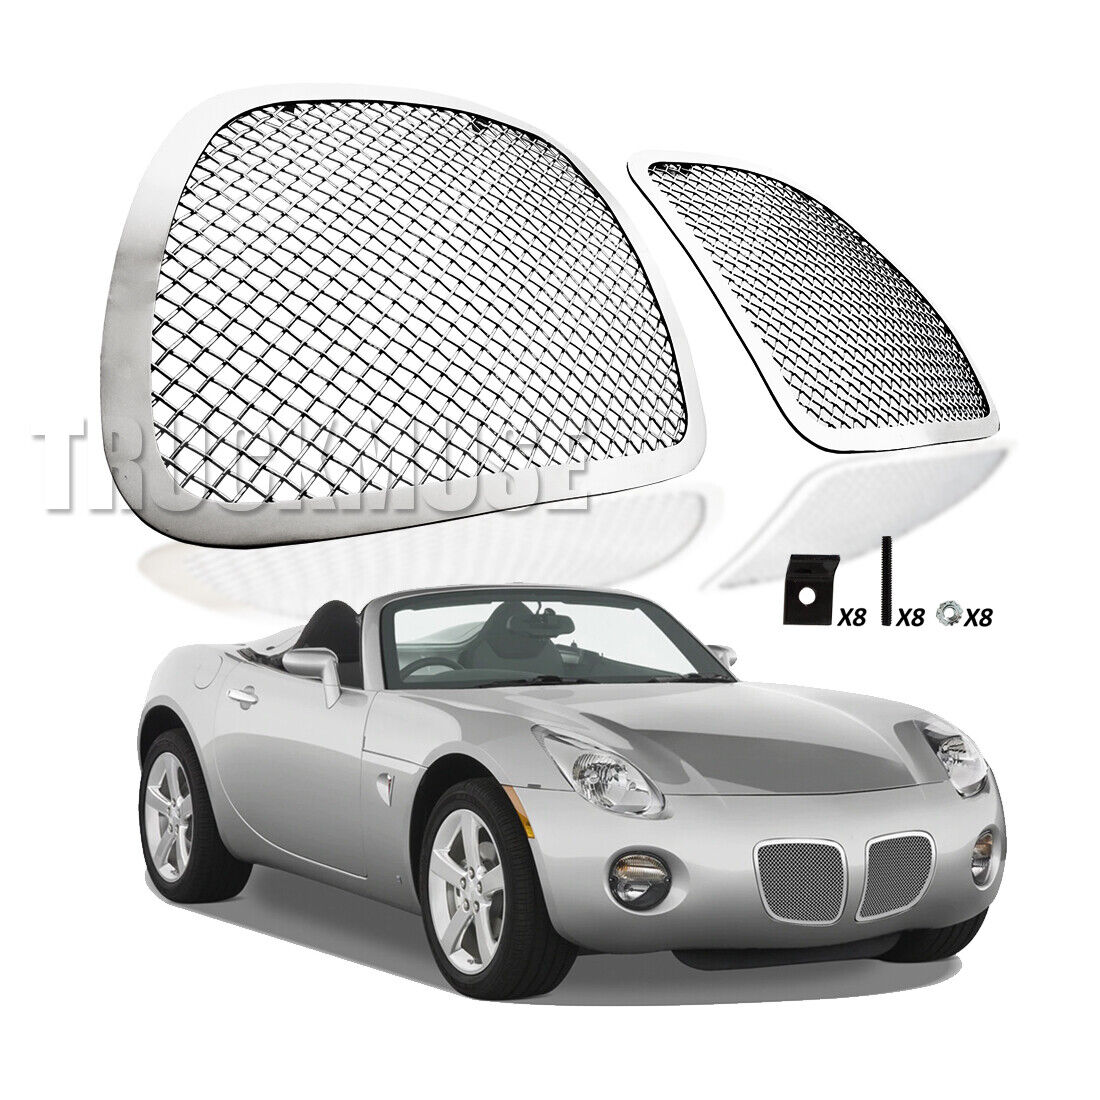 For 2006- 2008 Pontiac Solstice Front Grille Chrome Mesh Grill Combo